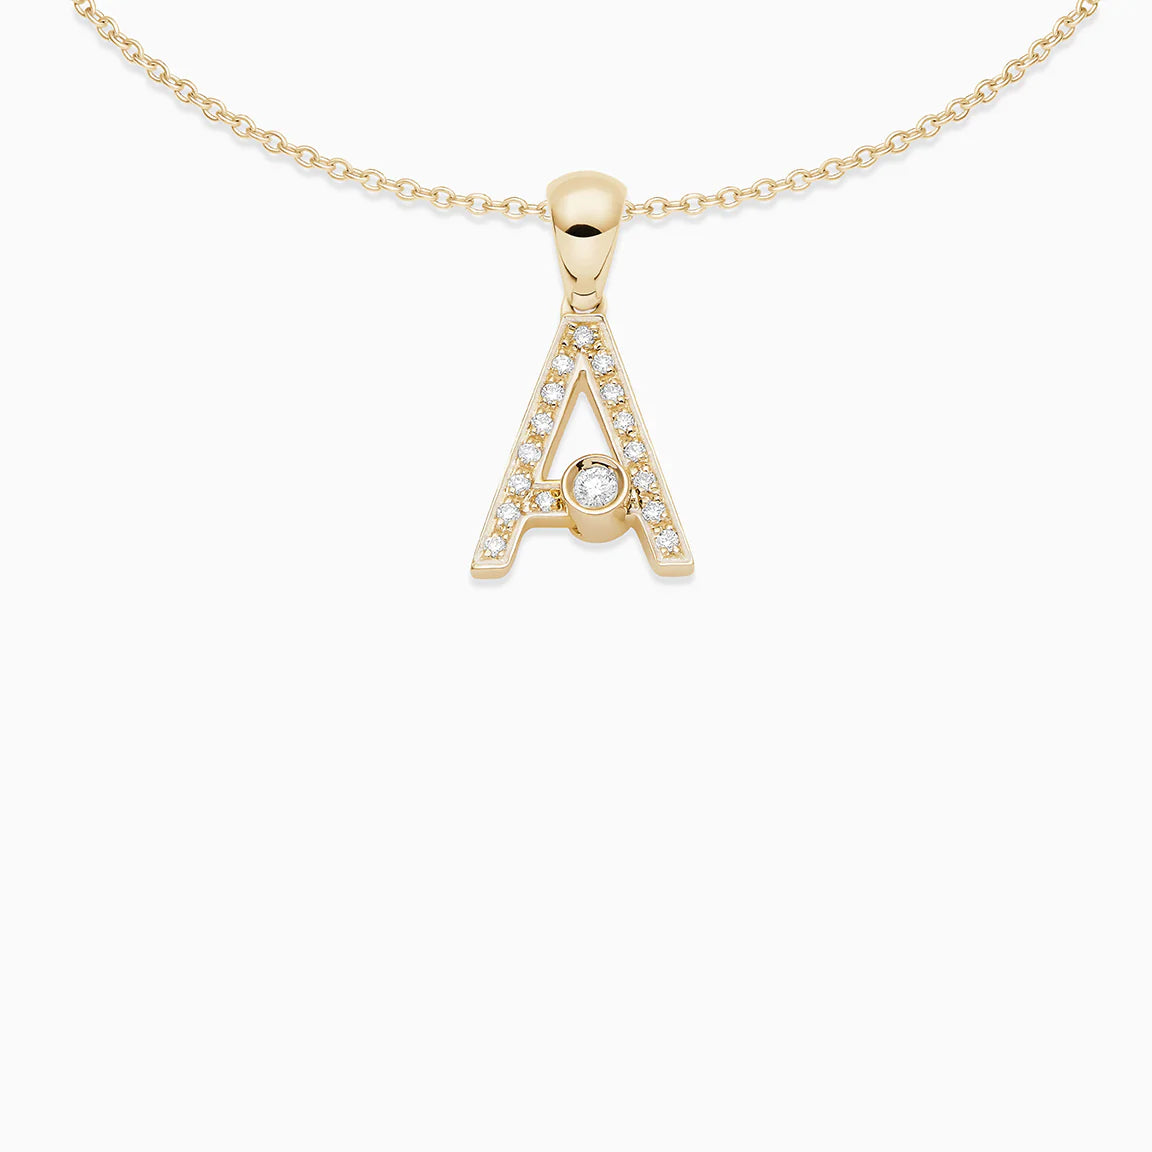 This sleek diamond pave letter pendant has a moving diamond accent that slides from side to side. This pendant comes with an 18kt yellow gold chain, the length of the chain is 16 inches. Available on FalenaFineJewelry.com or in-store